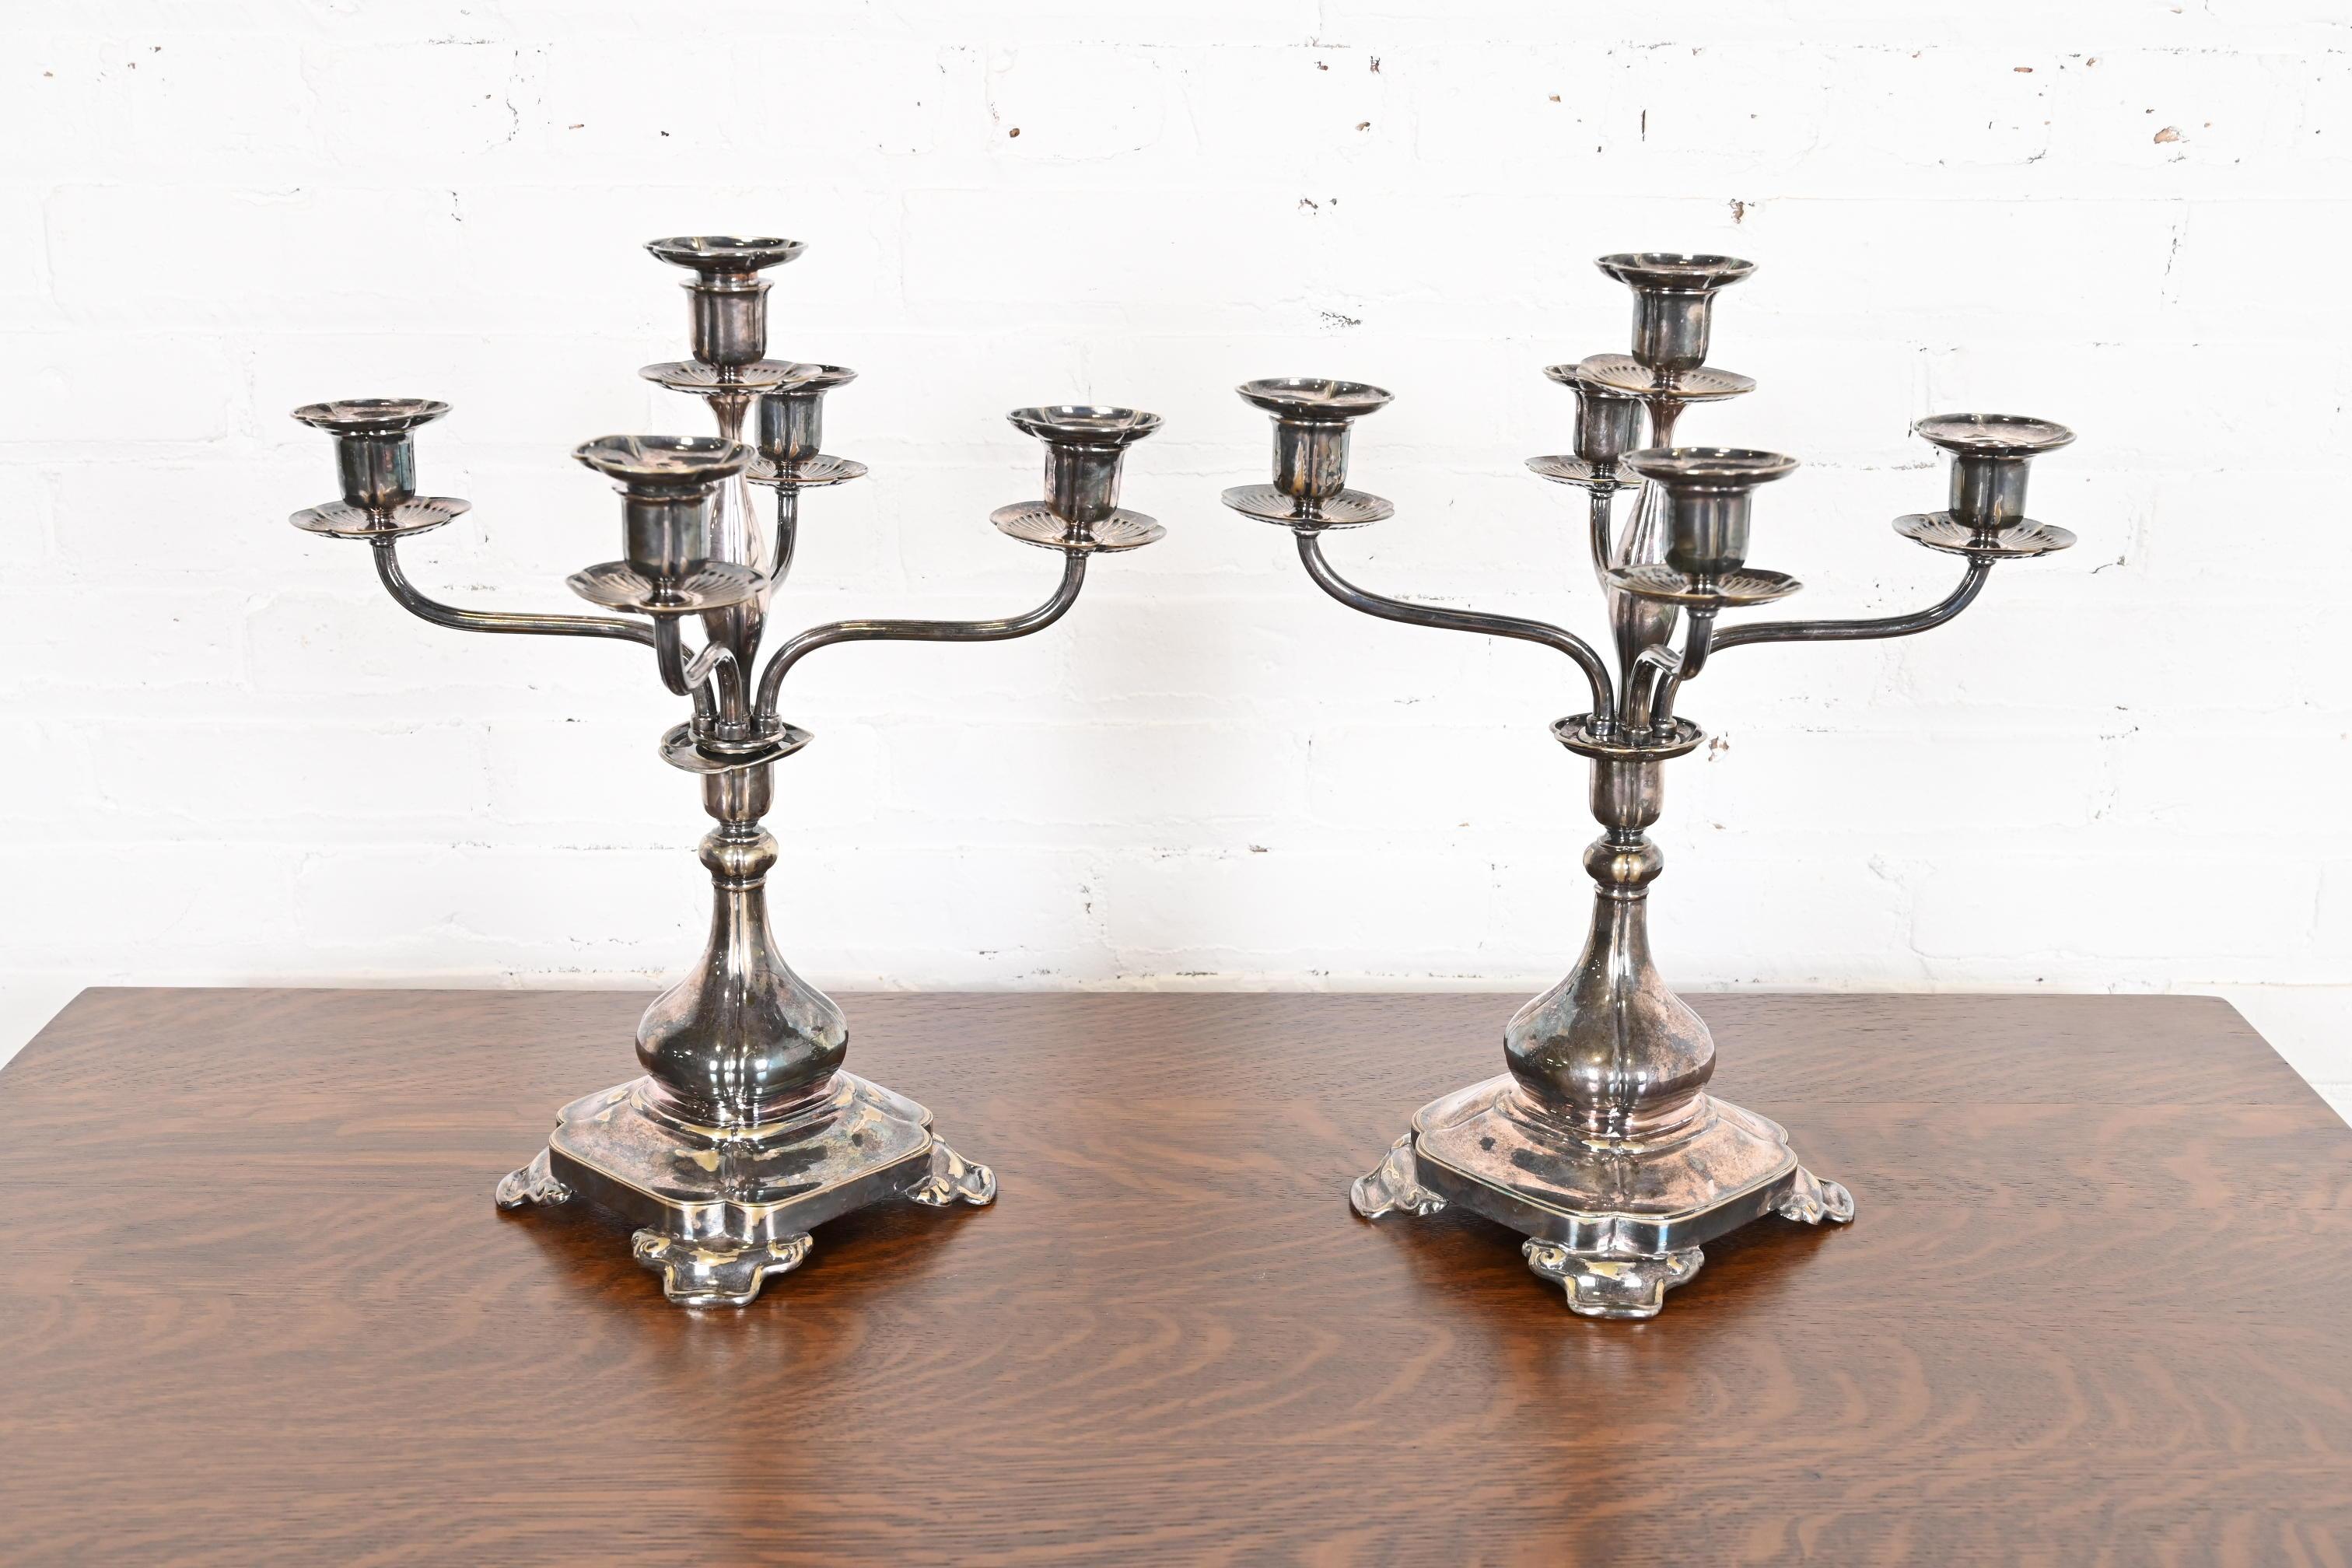 Tiffany & Co. Antique Silver Five-Arm Candelabra, Pair For Sale 3